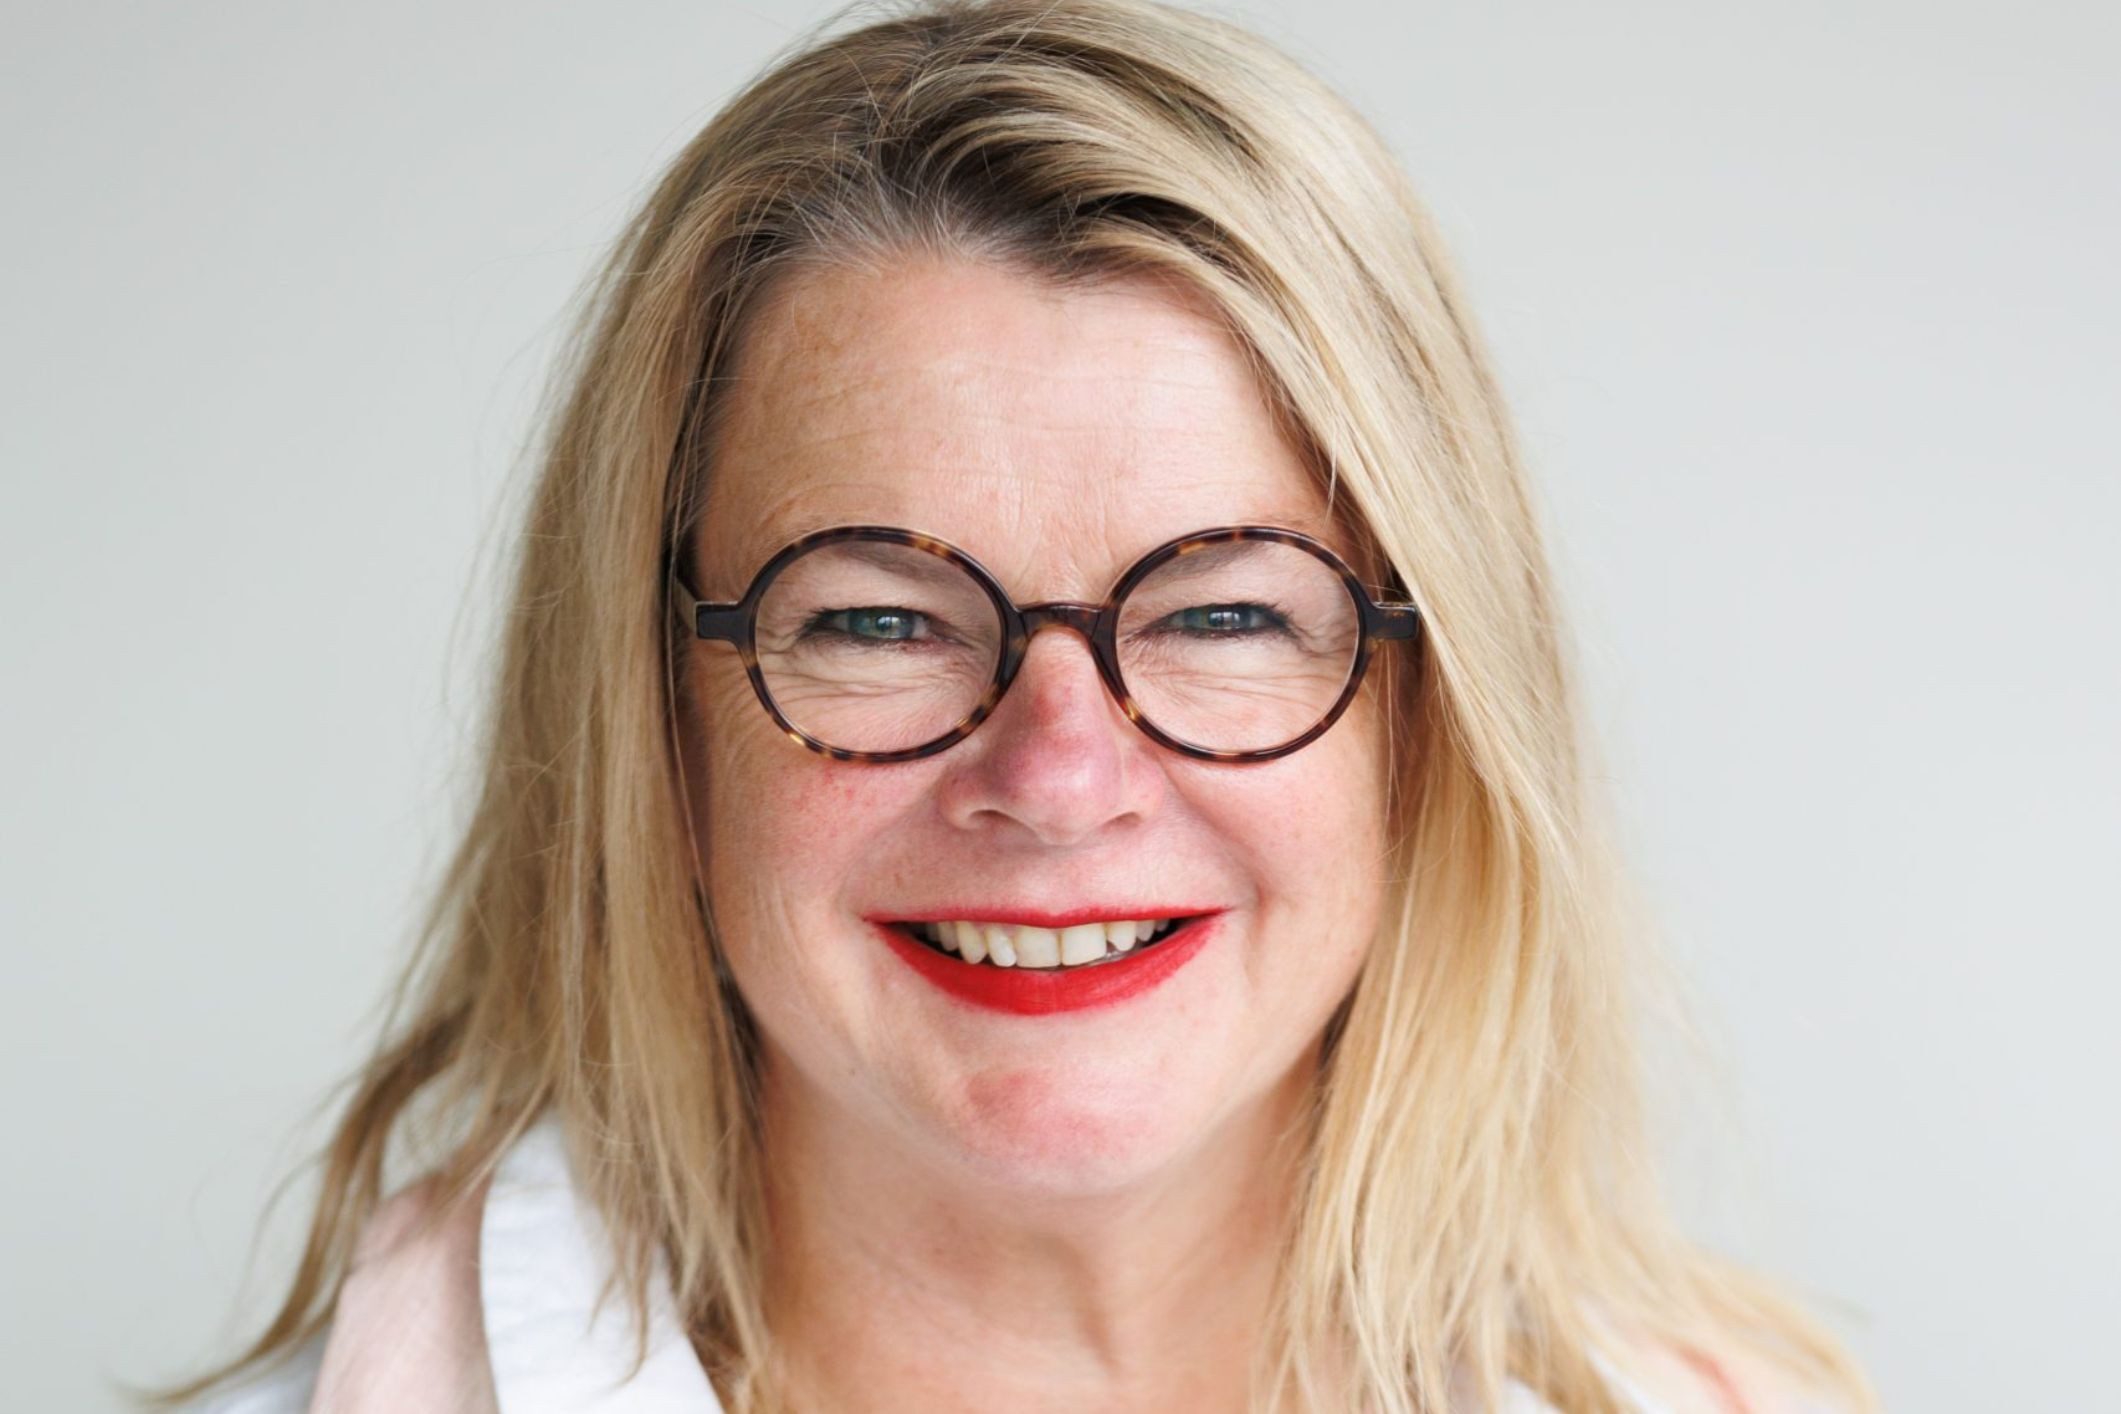 Louise O’Neil steps down as CEO of Aged Care Workforce Industry Council